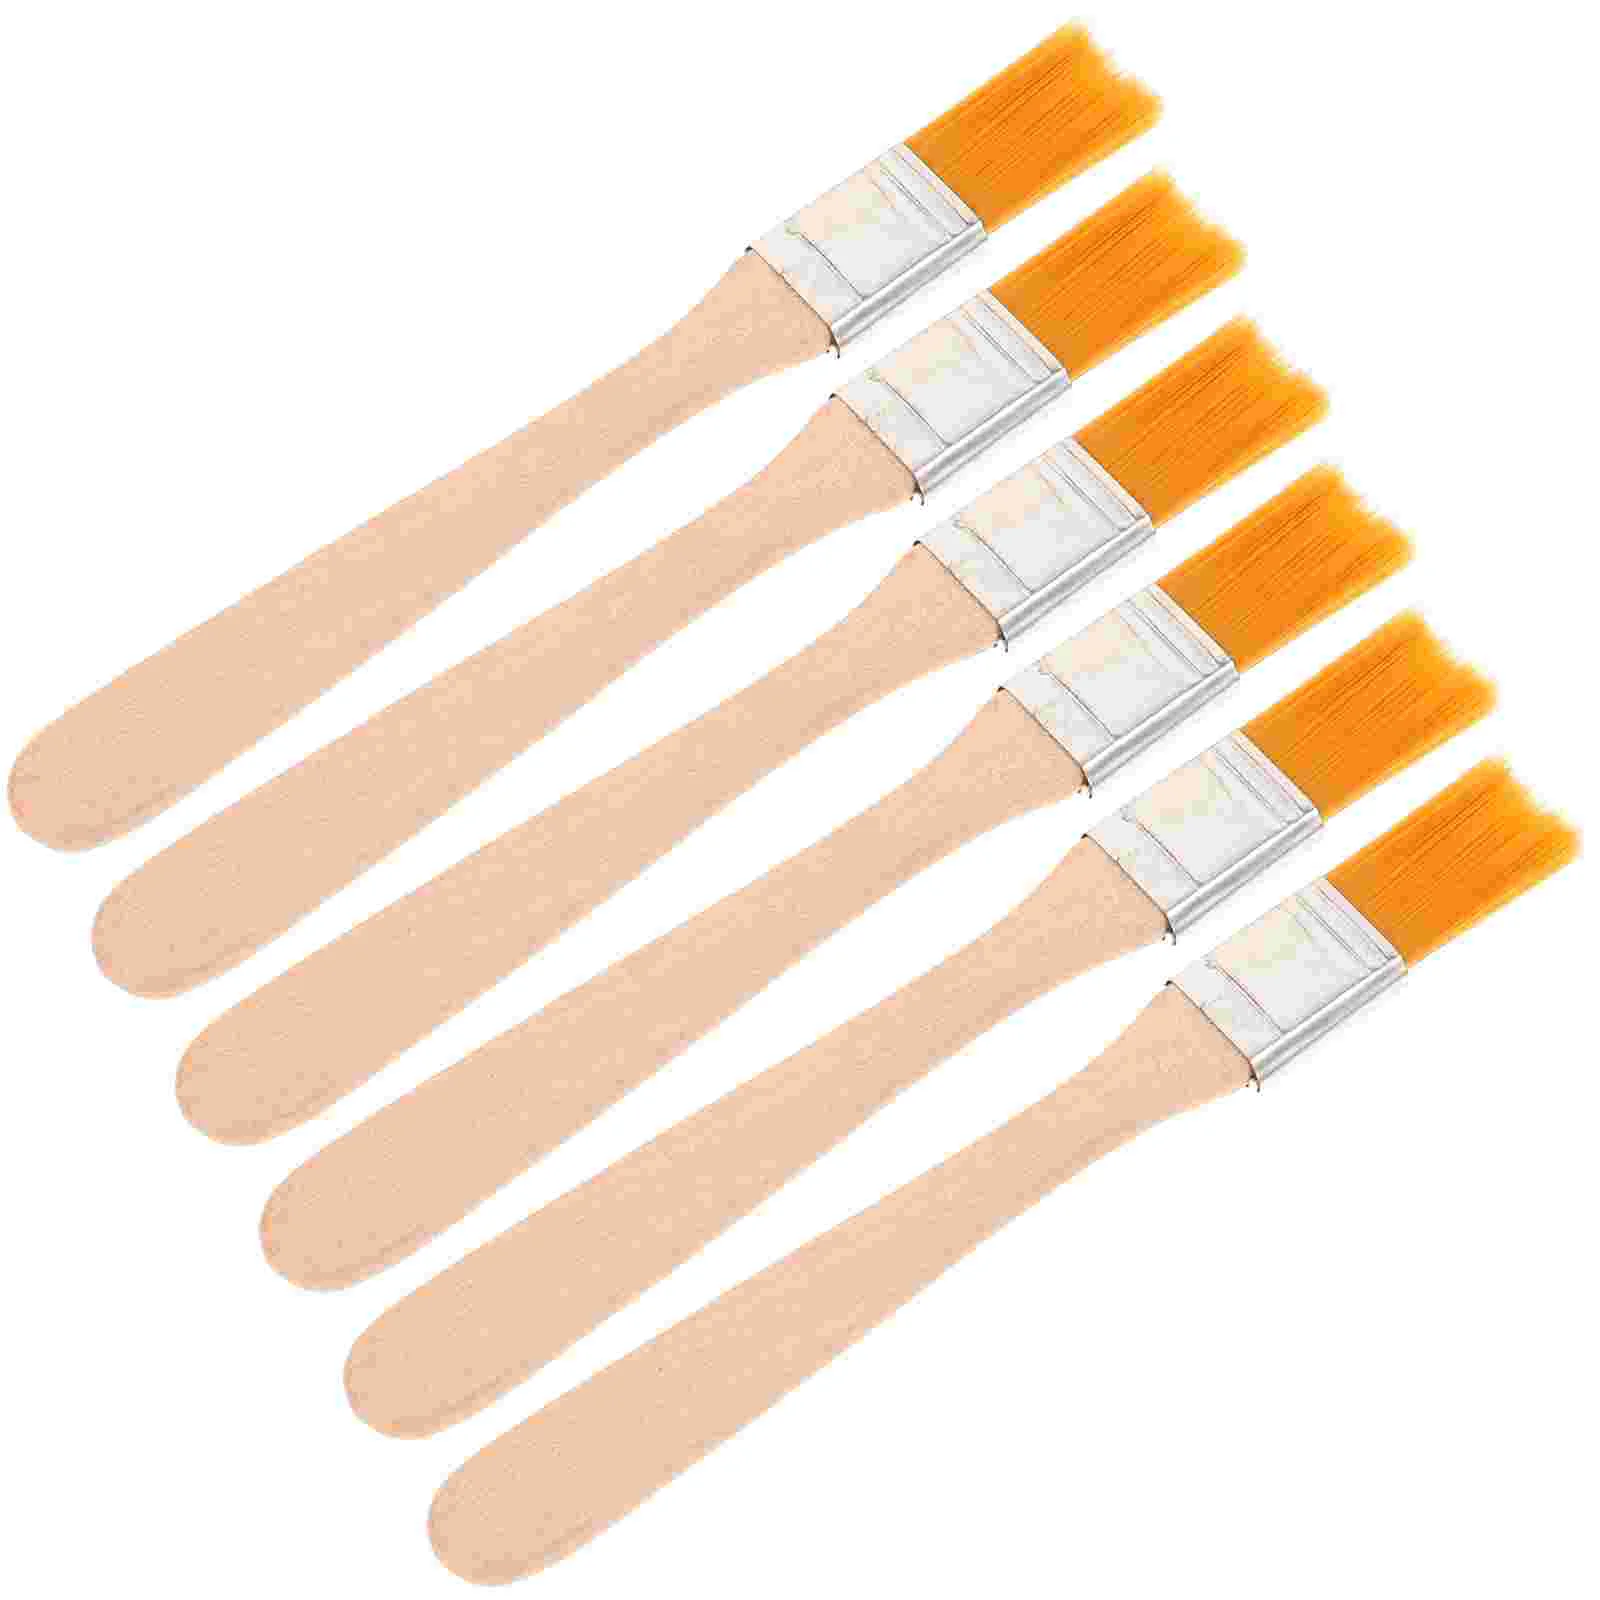 

6 Pcs Oil Painting Brushes Kids Professional for Portable Reusable Wooden Small